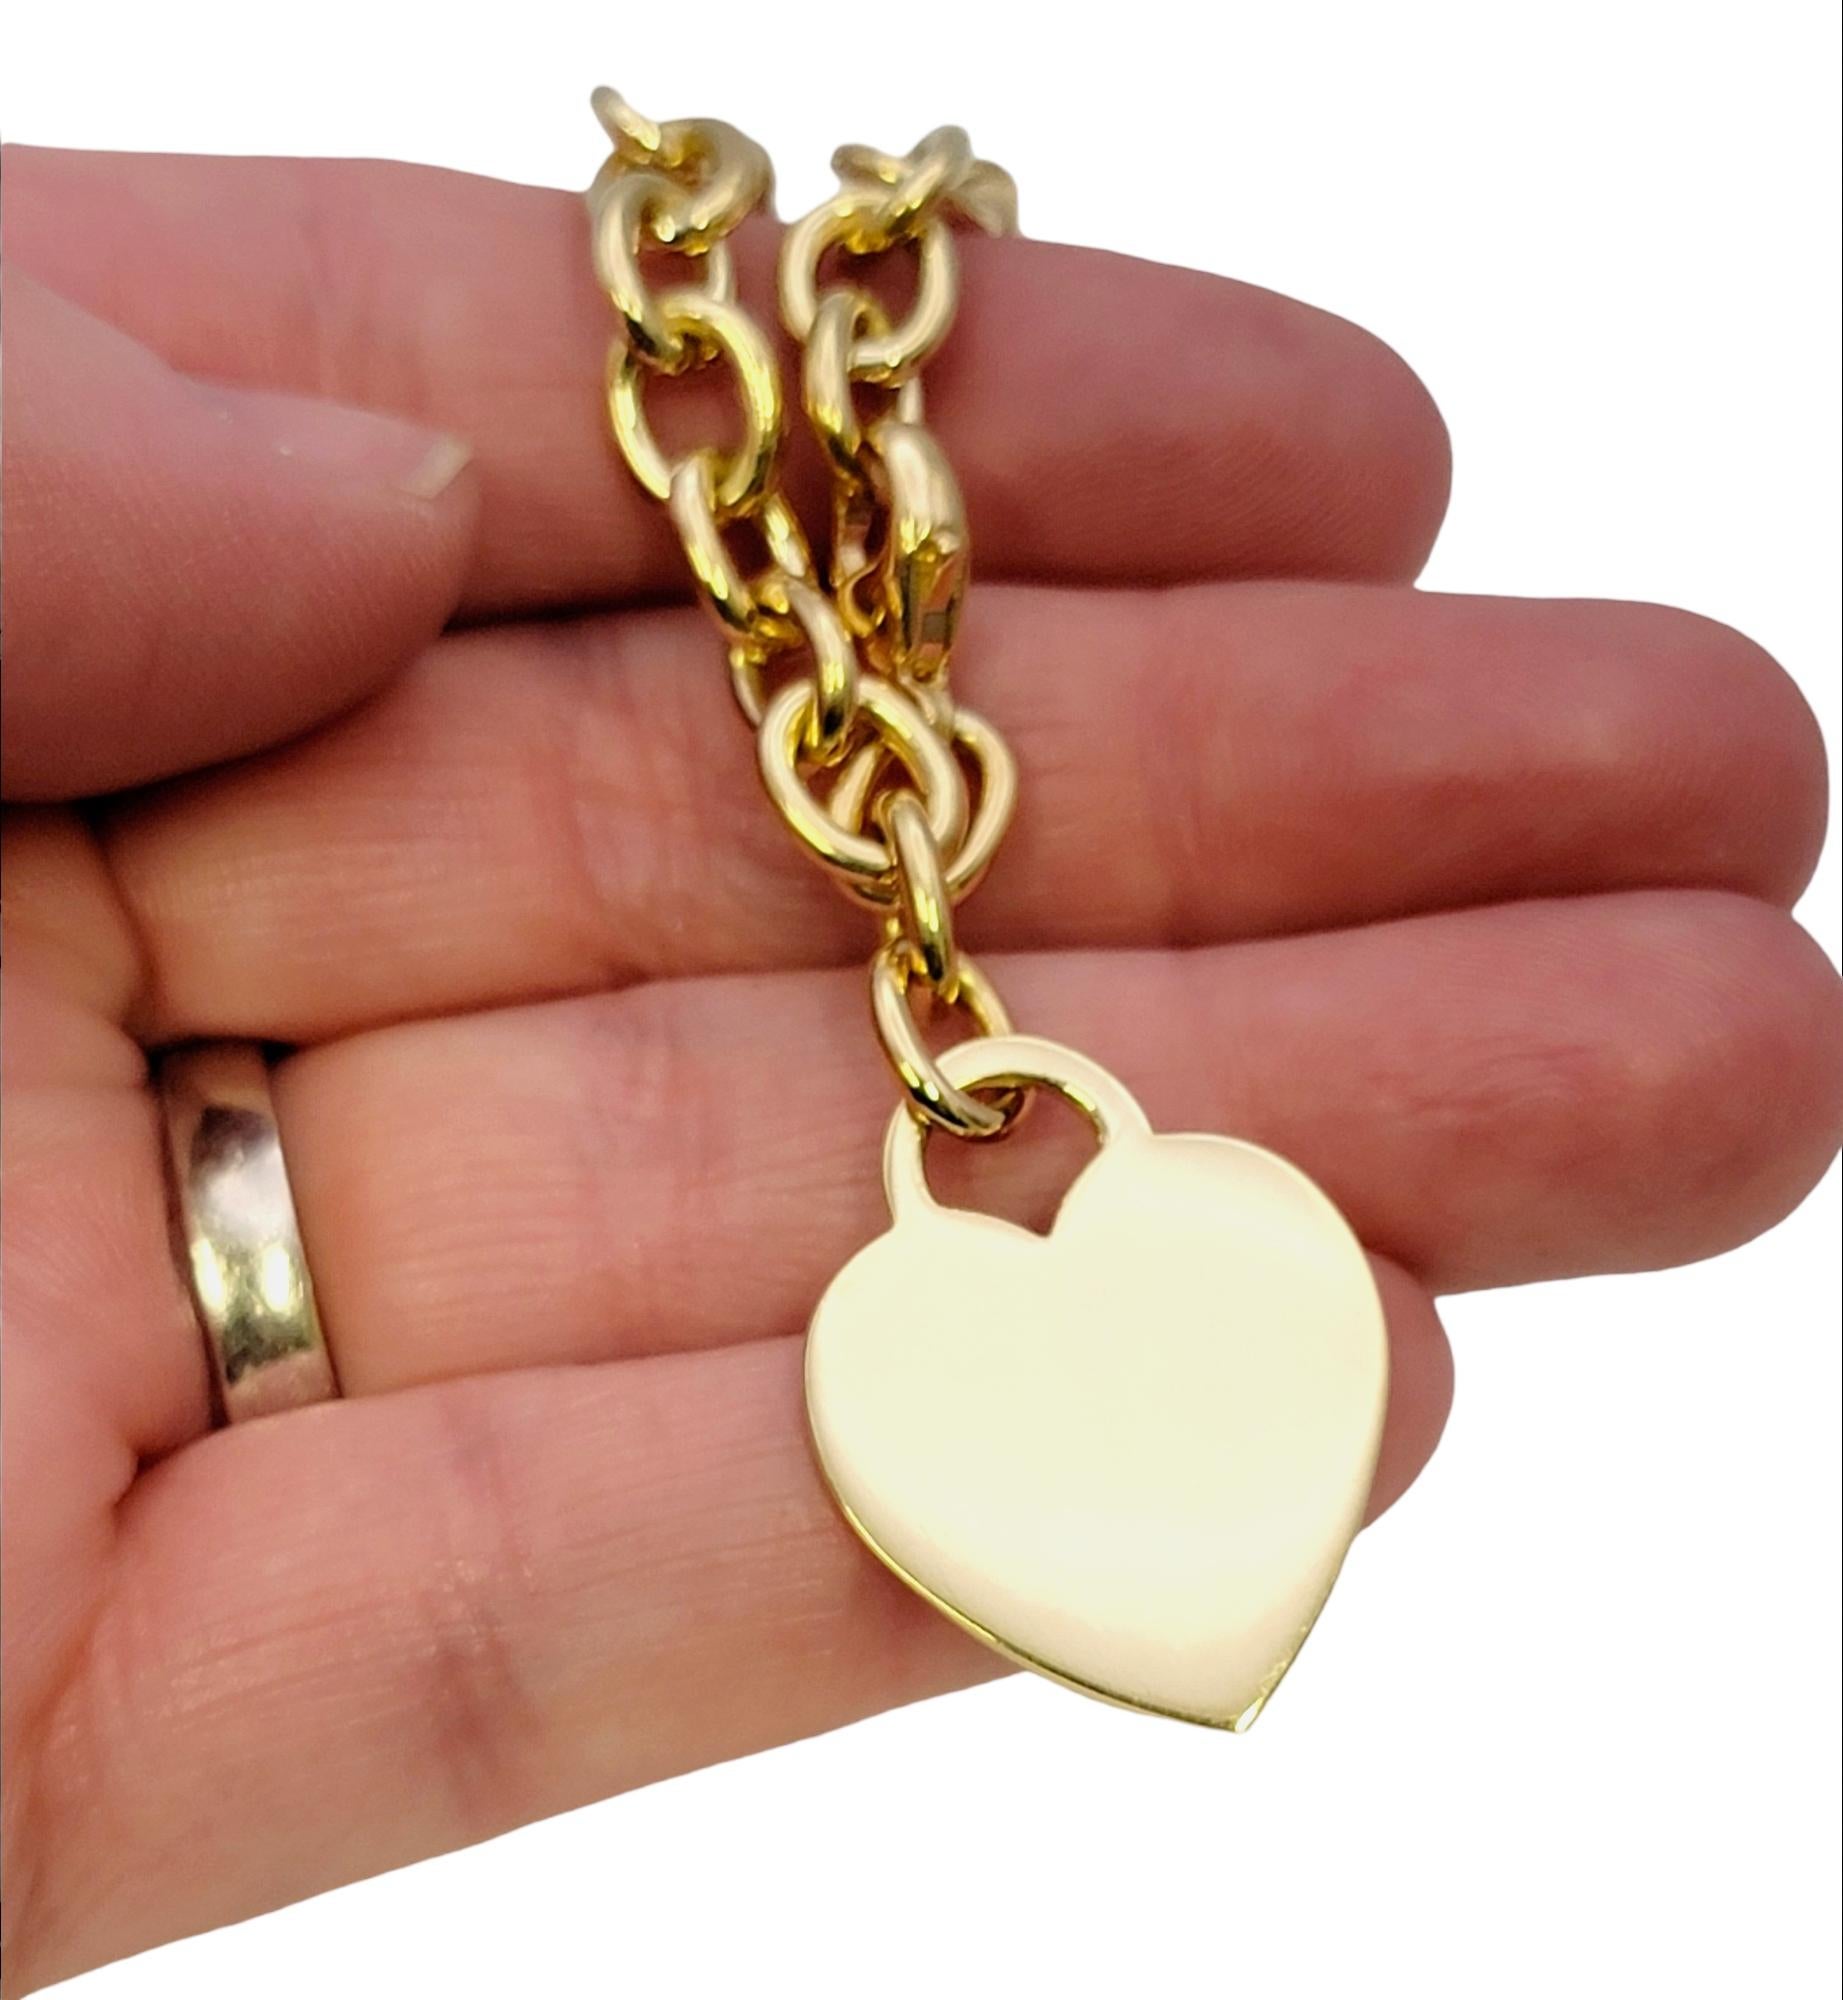 Tiffany & Co. Heart Tag Chain Link Bracelet in Polished 18 Karat Yellow Gold For Sale 3